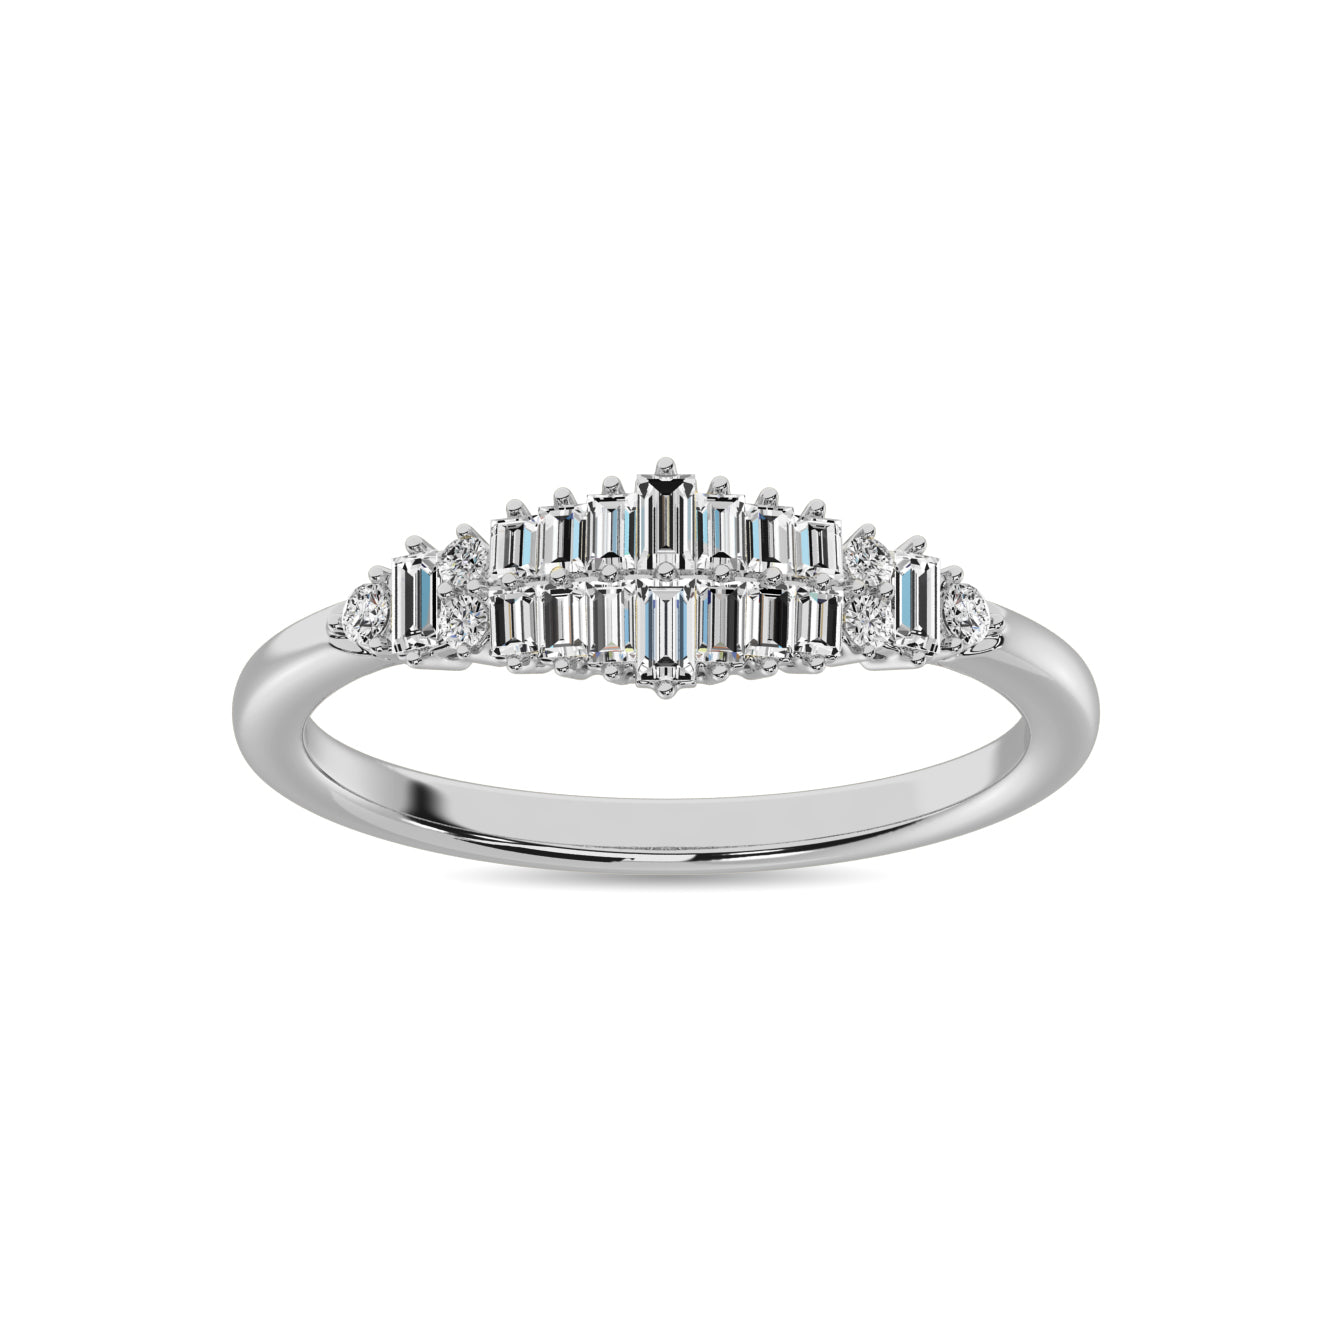 Diamond 1/4 Ct.Tw. Round and Baguette Fashion Ring in 10K White Gold